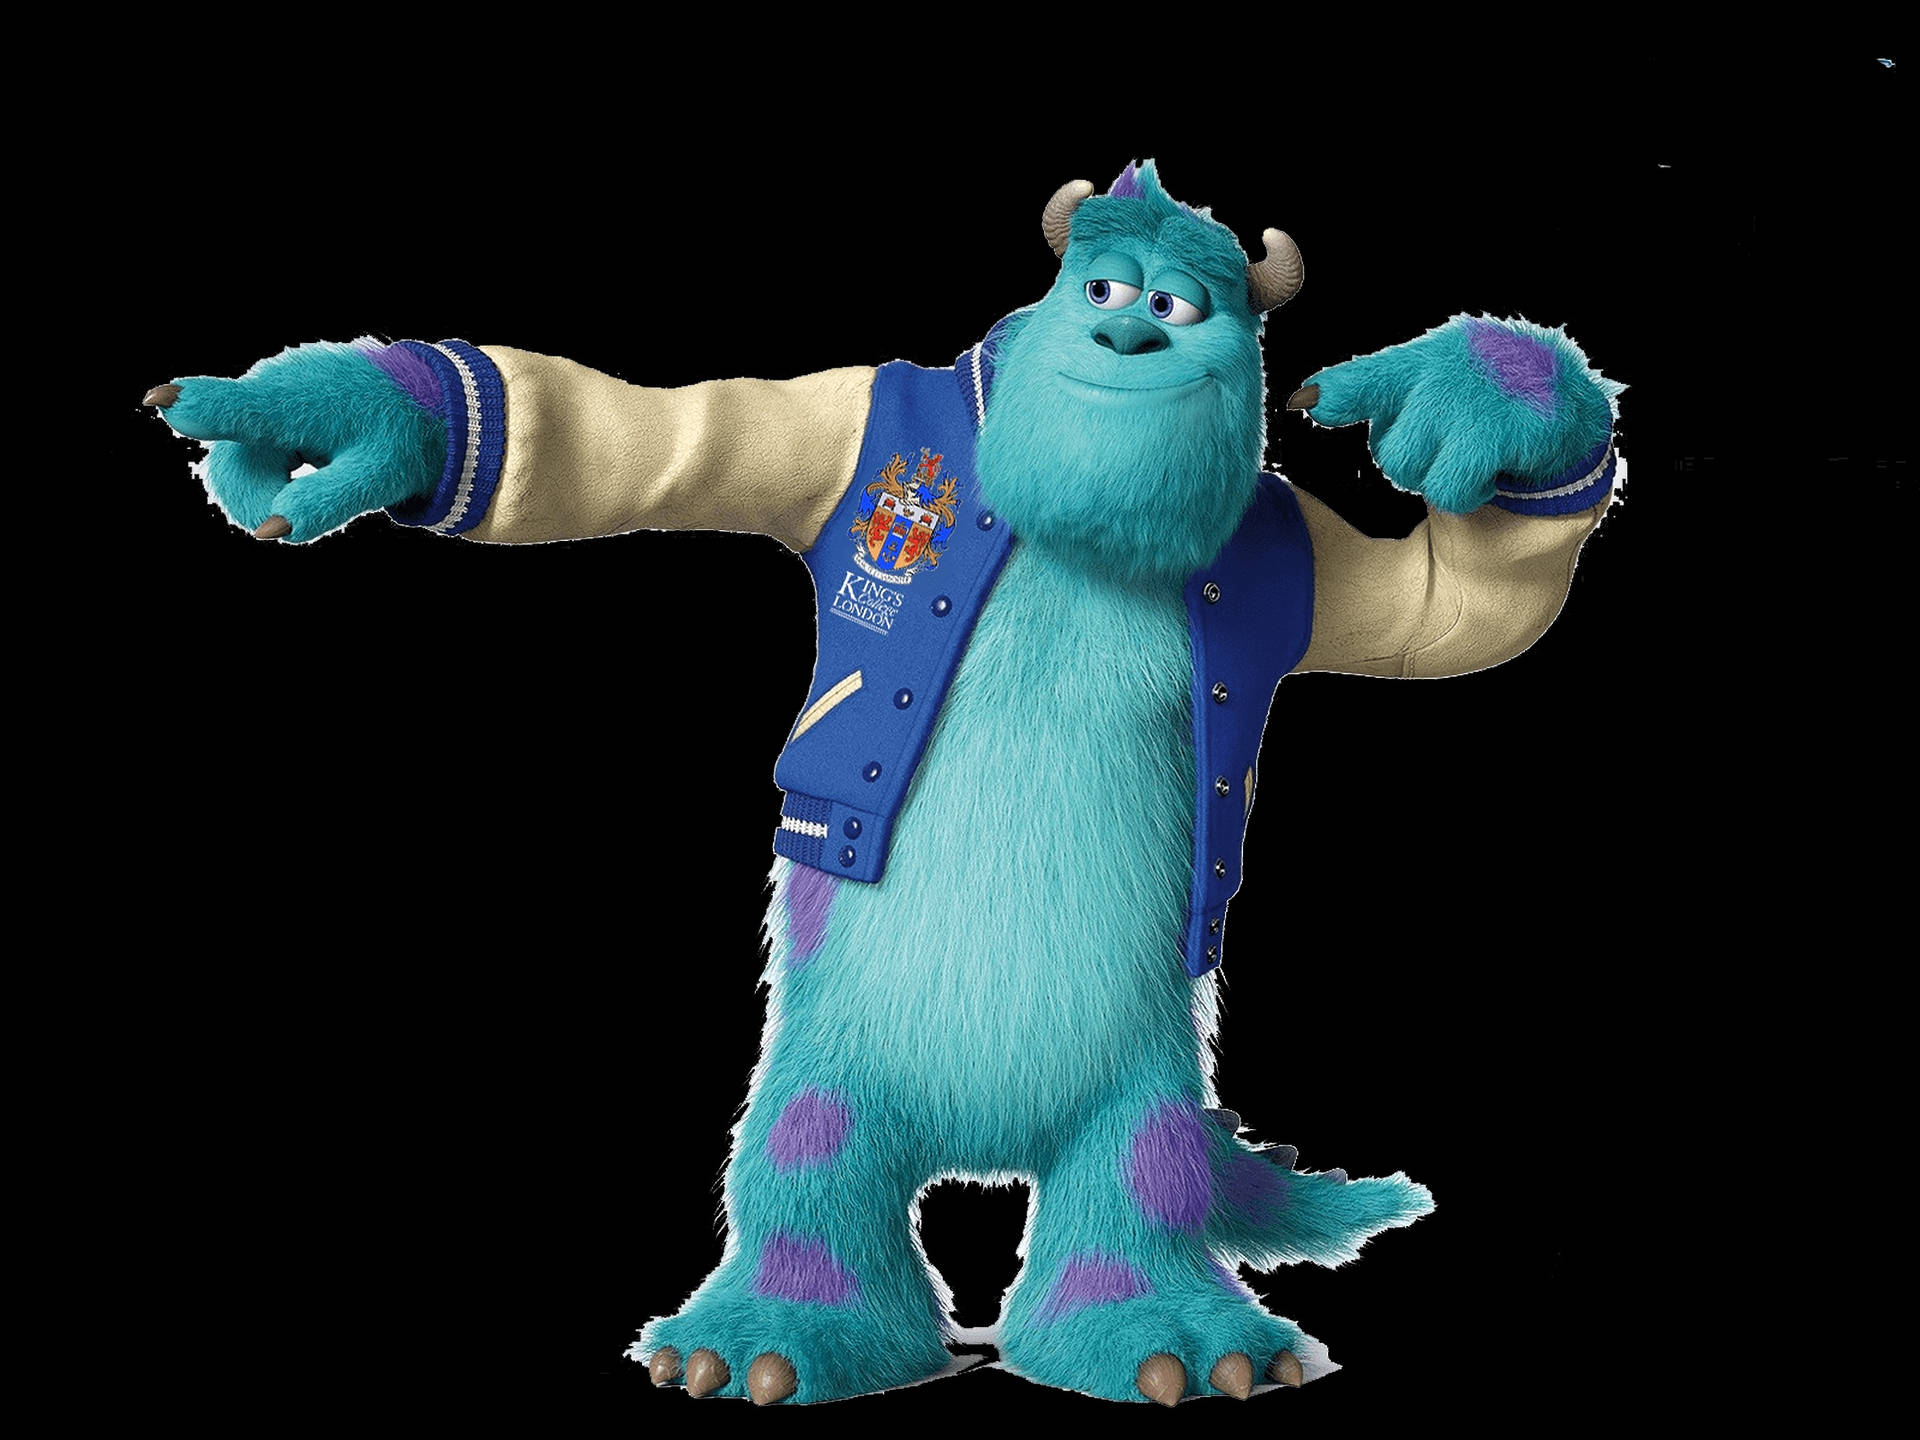 Top 999+ Monsters University Wallpaper Full HD, 4K Free to Use